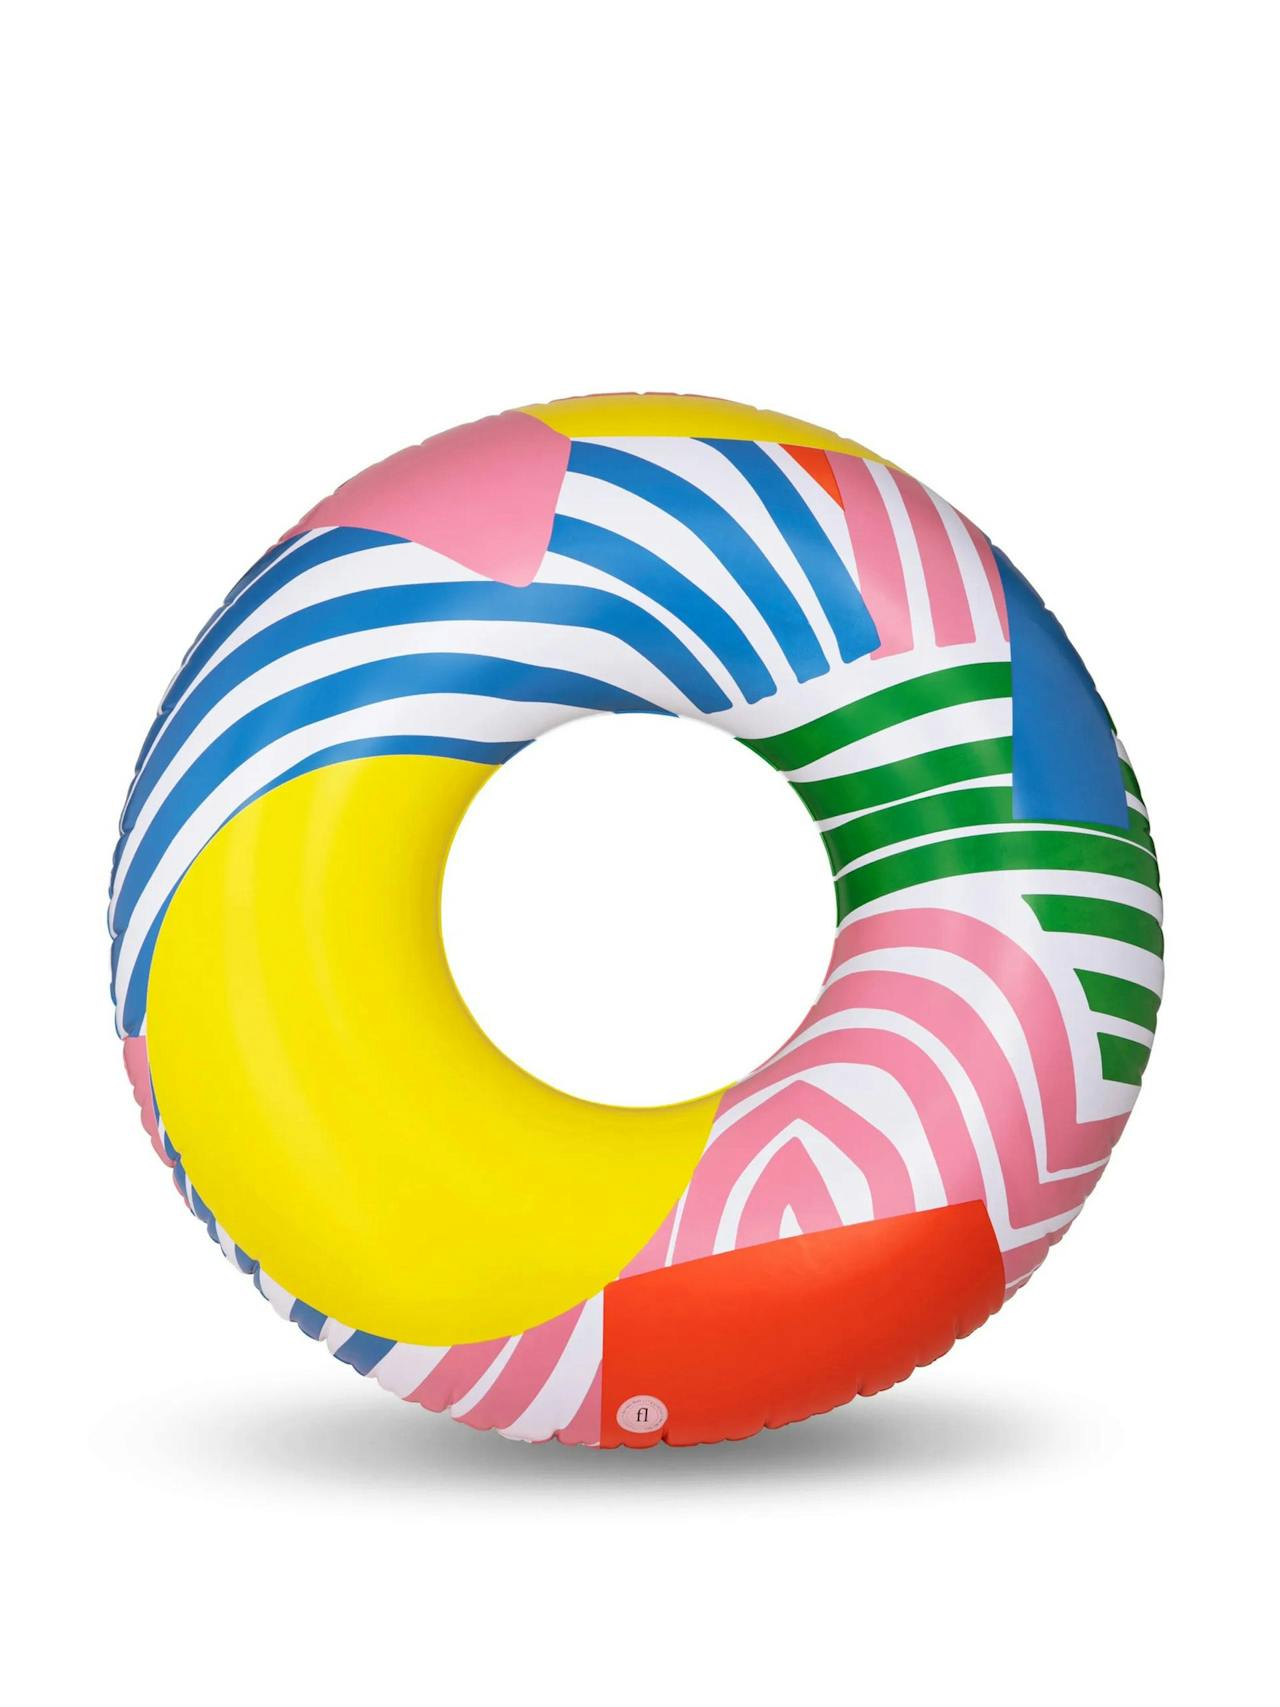 Odyssey inflatable rubber ring